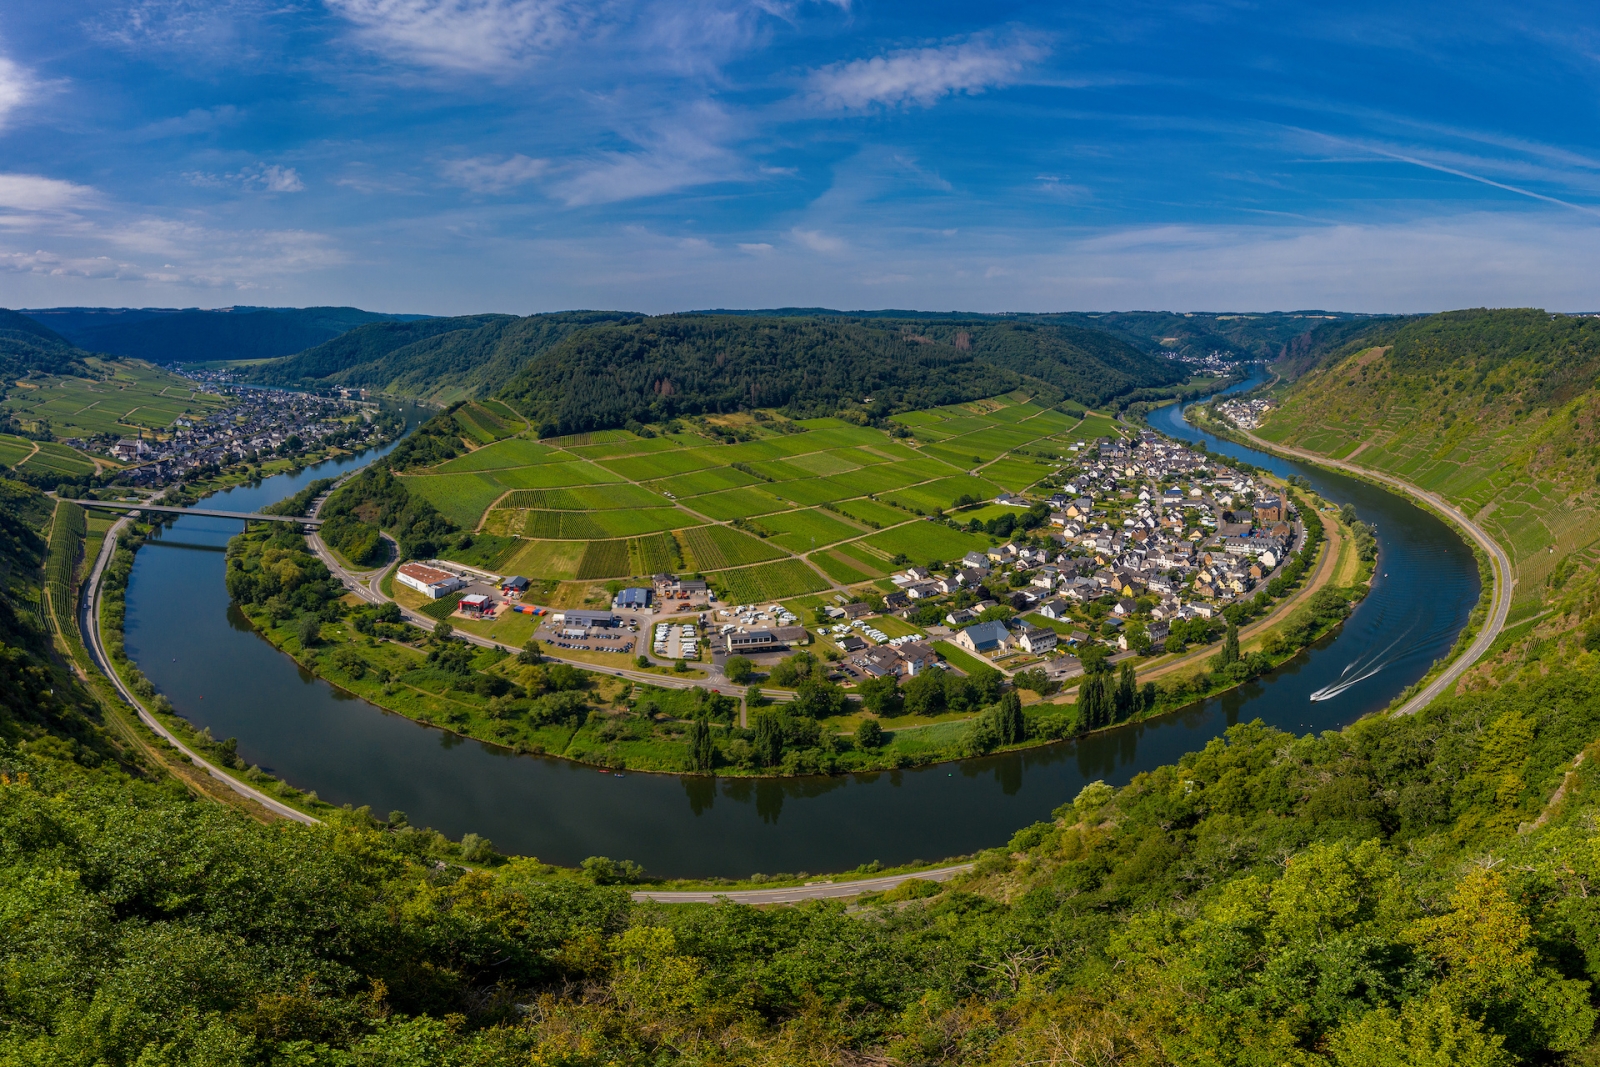 Panoramic view of the loop of the Moselle near Bruttig near Cochem, Germany.